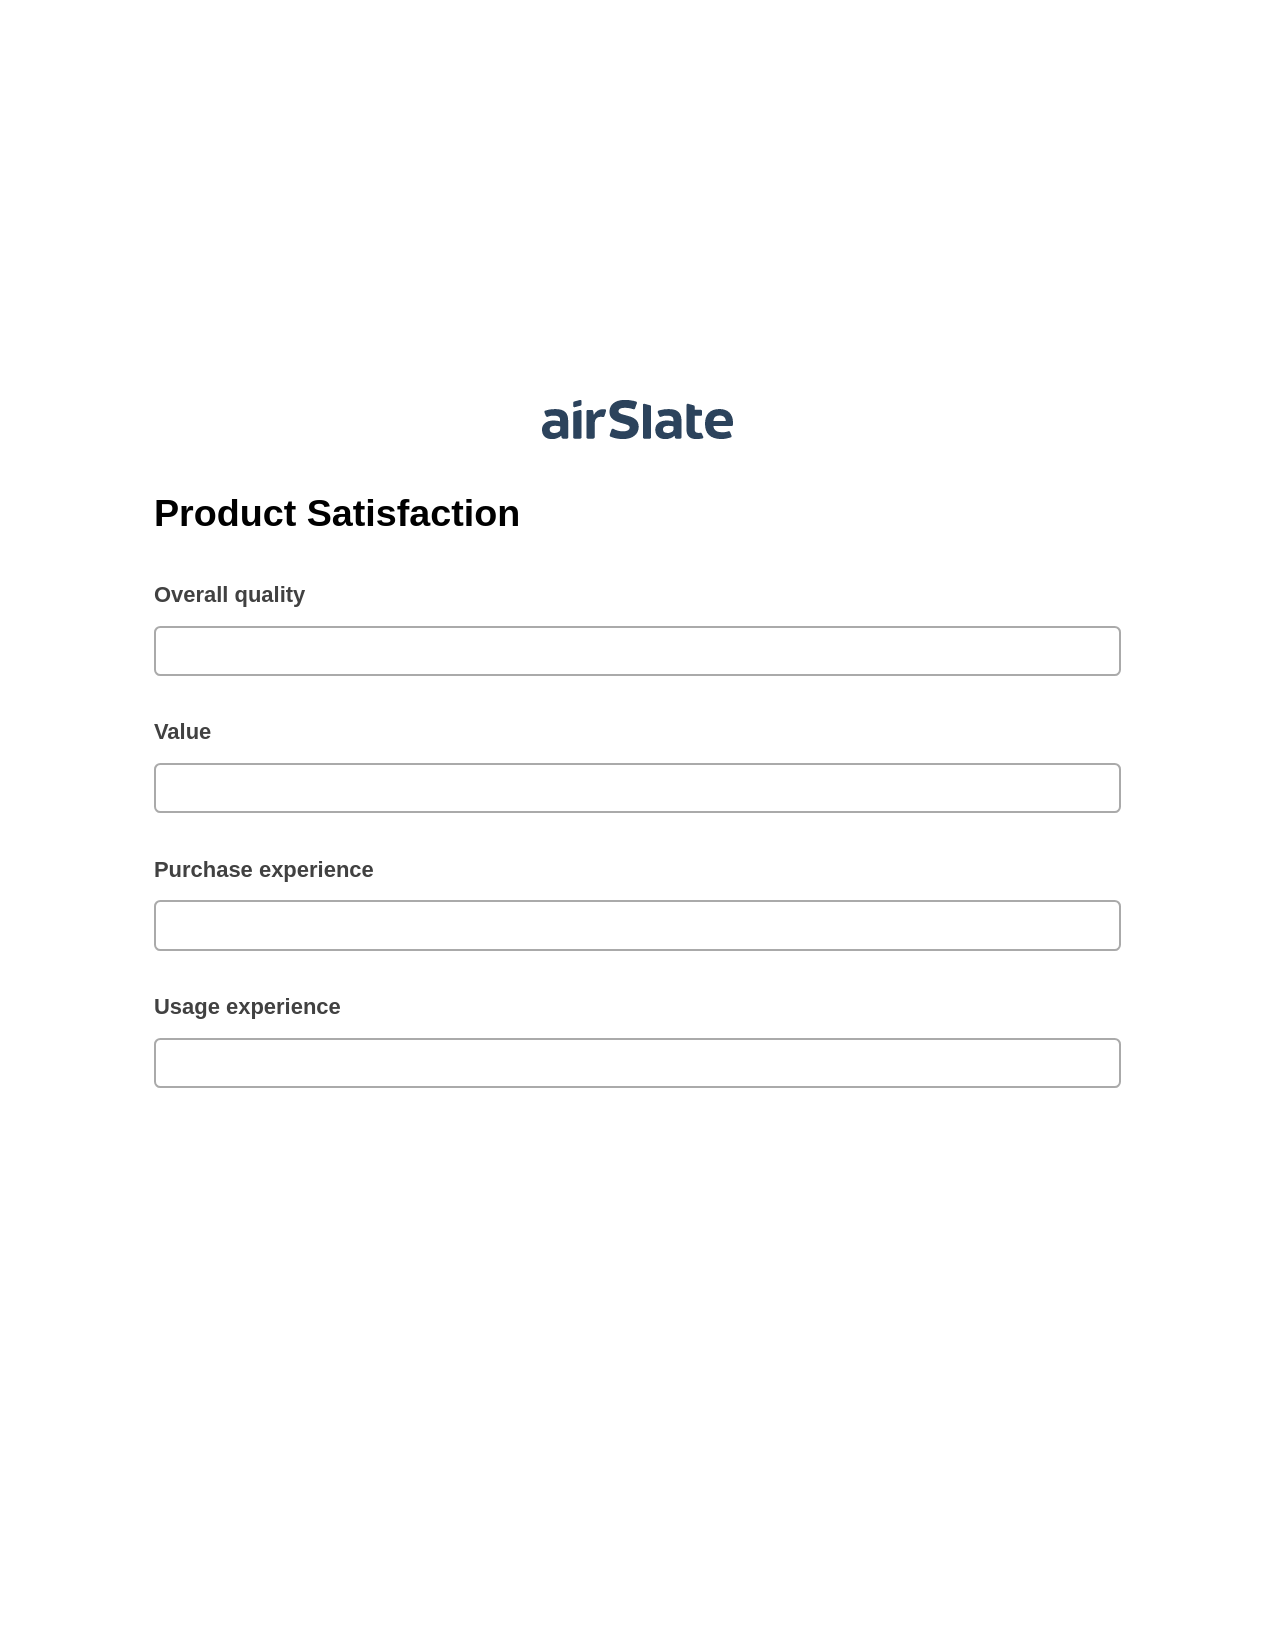 Multirole Product Satisfaction Pre-fill from CSV File Bot, Reminder Bot, Export to Smartsheet